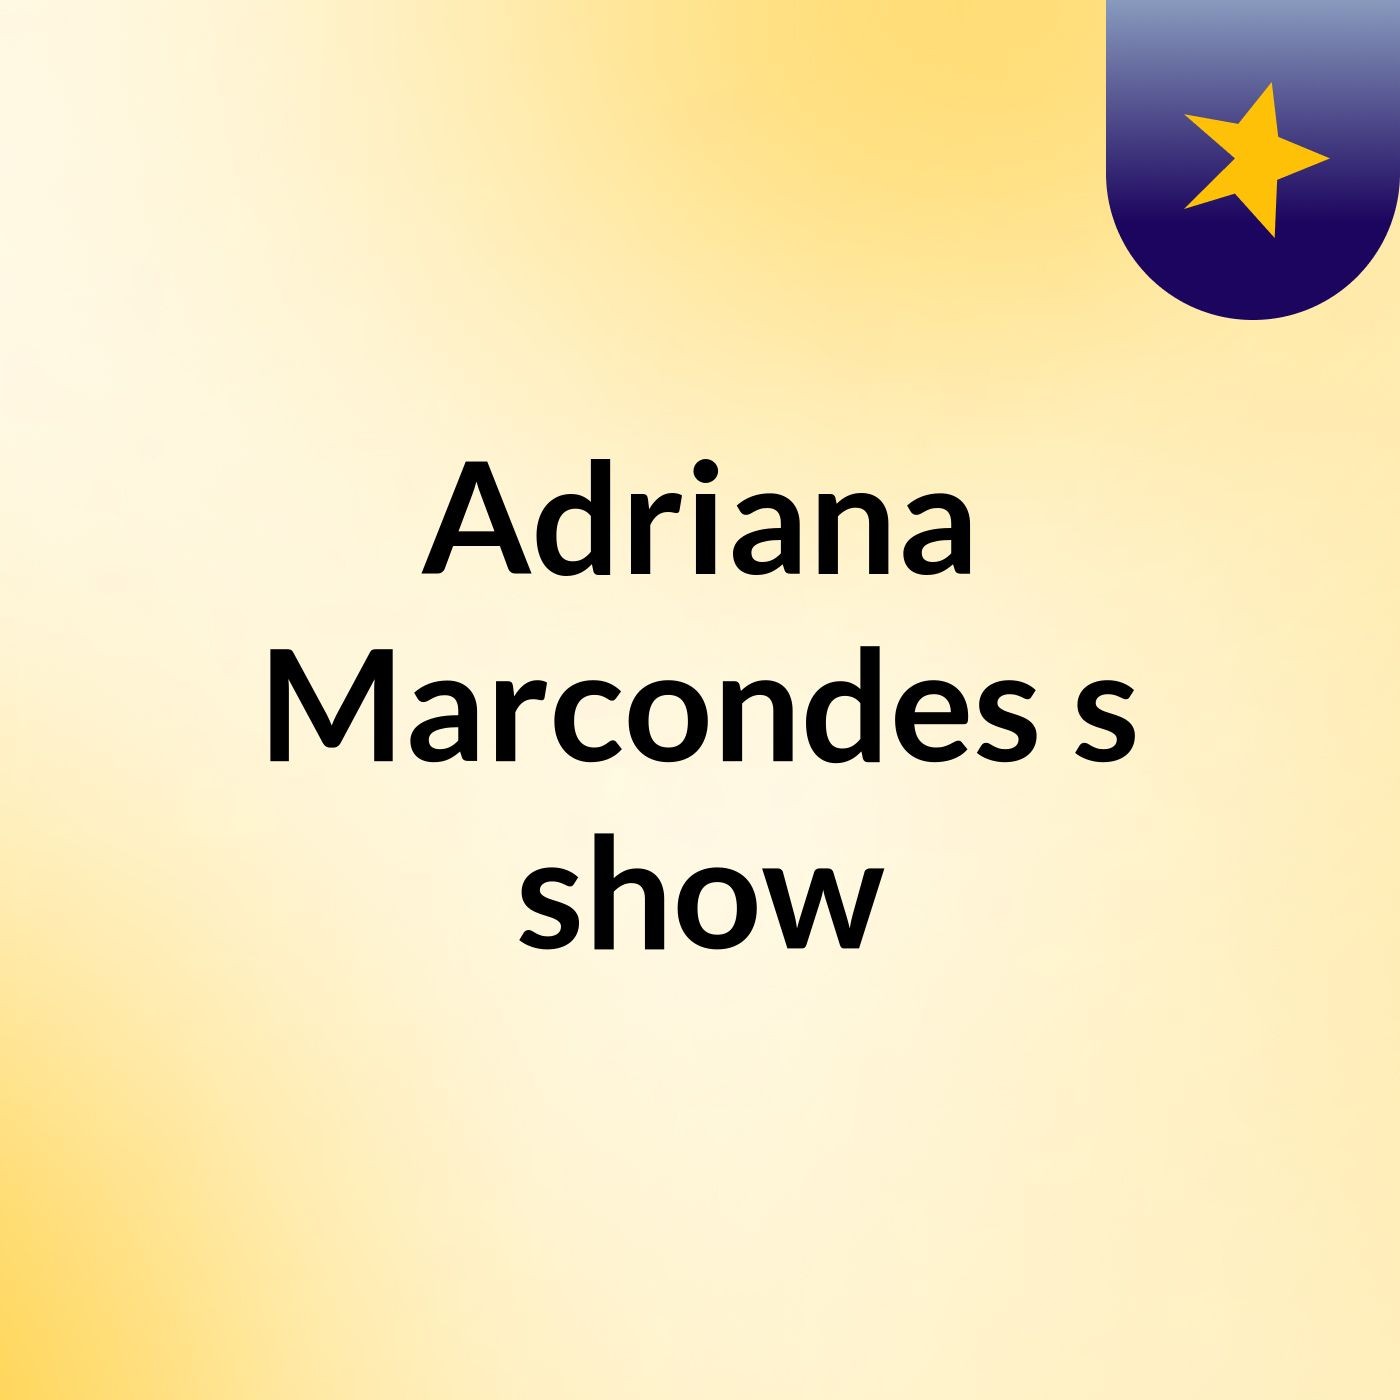 Adriana Marcondes's show